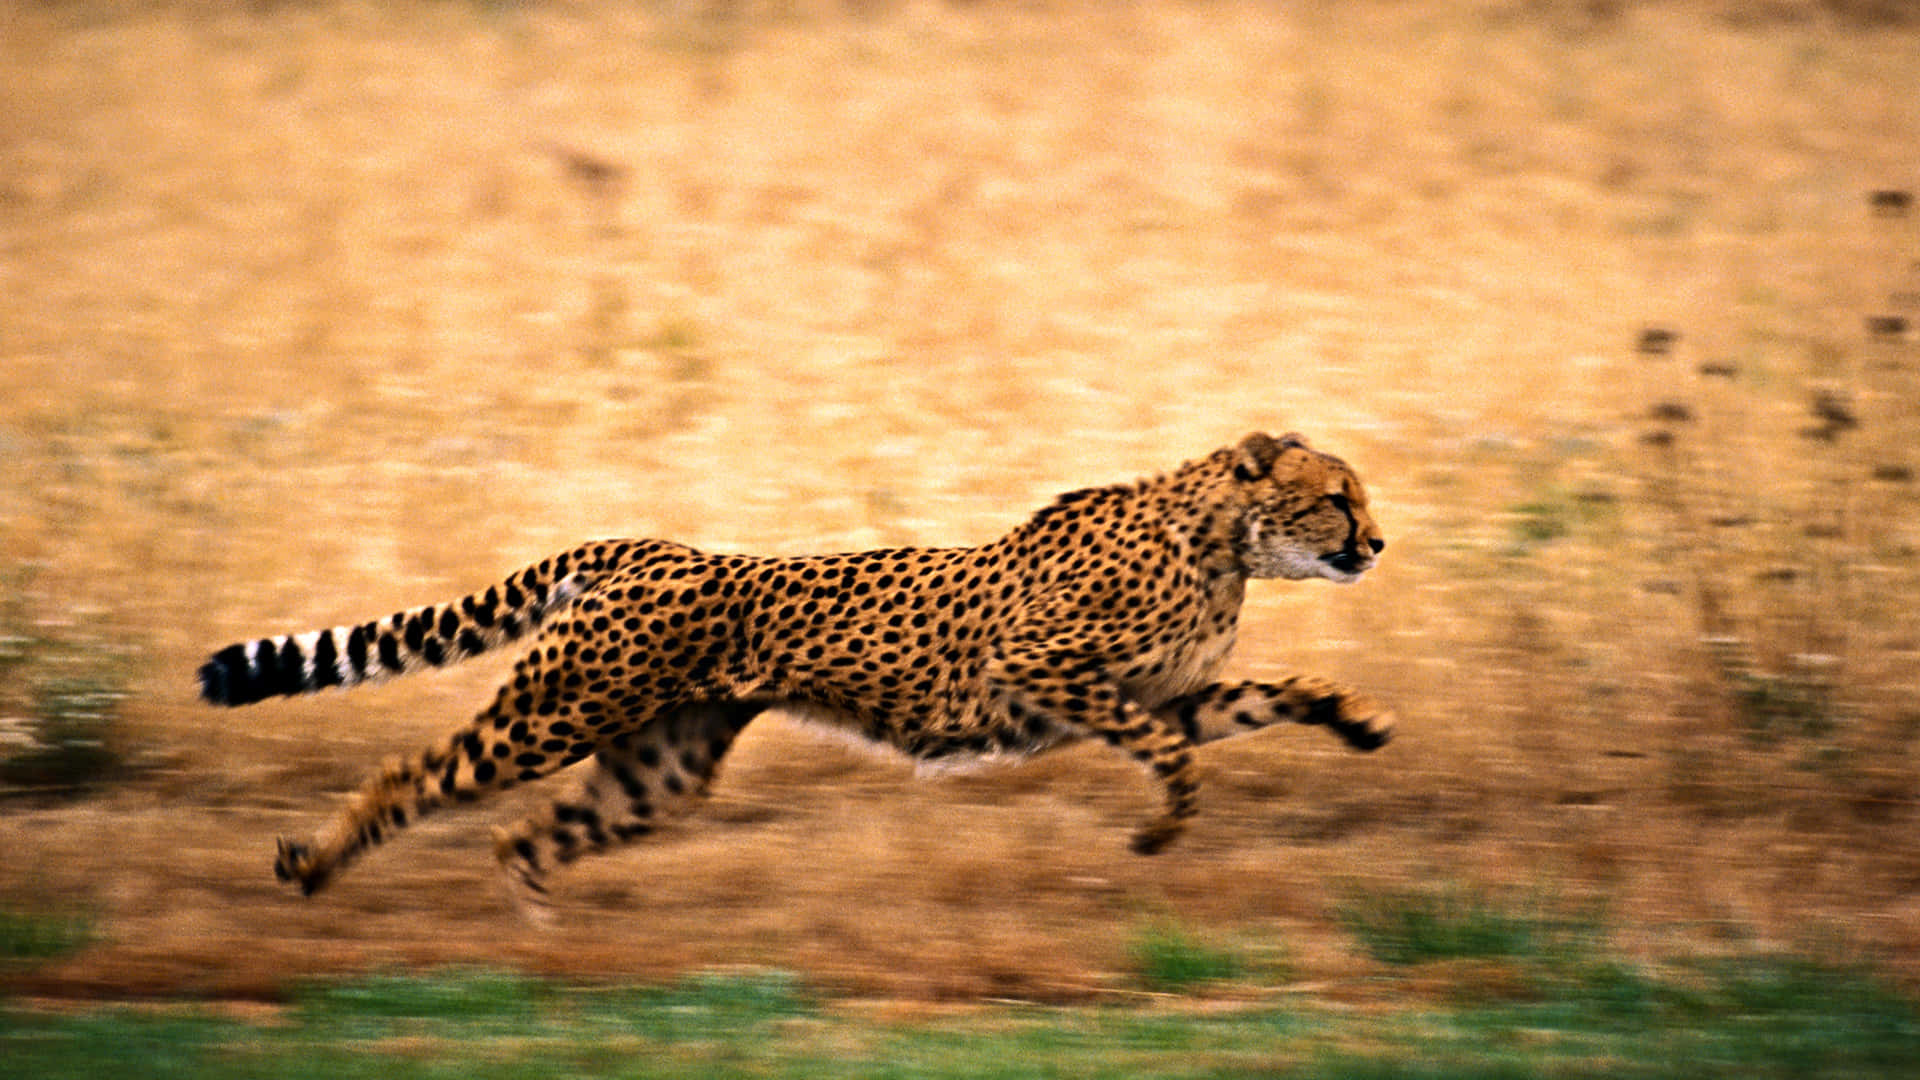 The beautiful cheetah blend in with the natural environment. Wallpaper